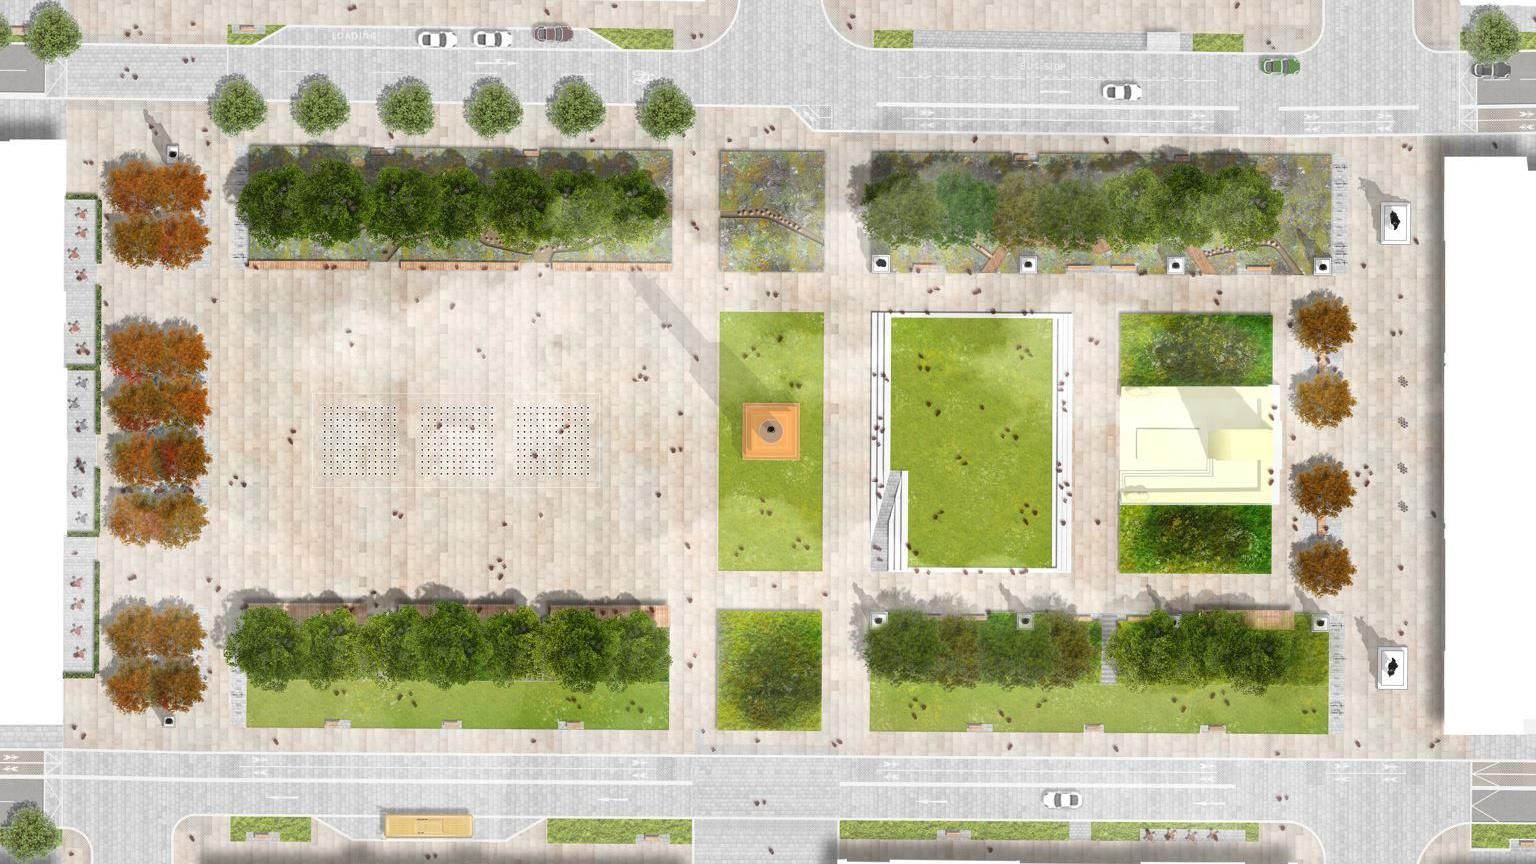 Bird's eye view of plans for George Square